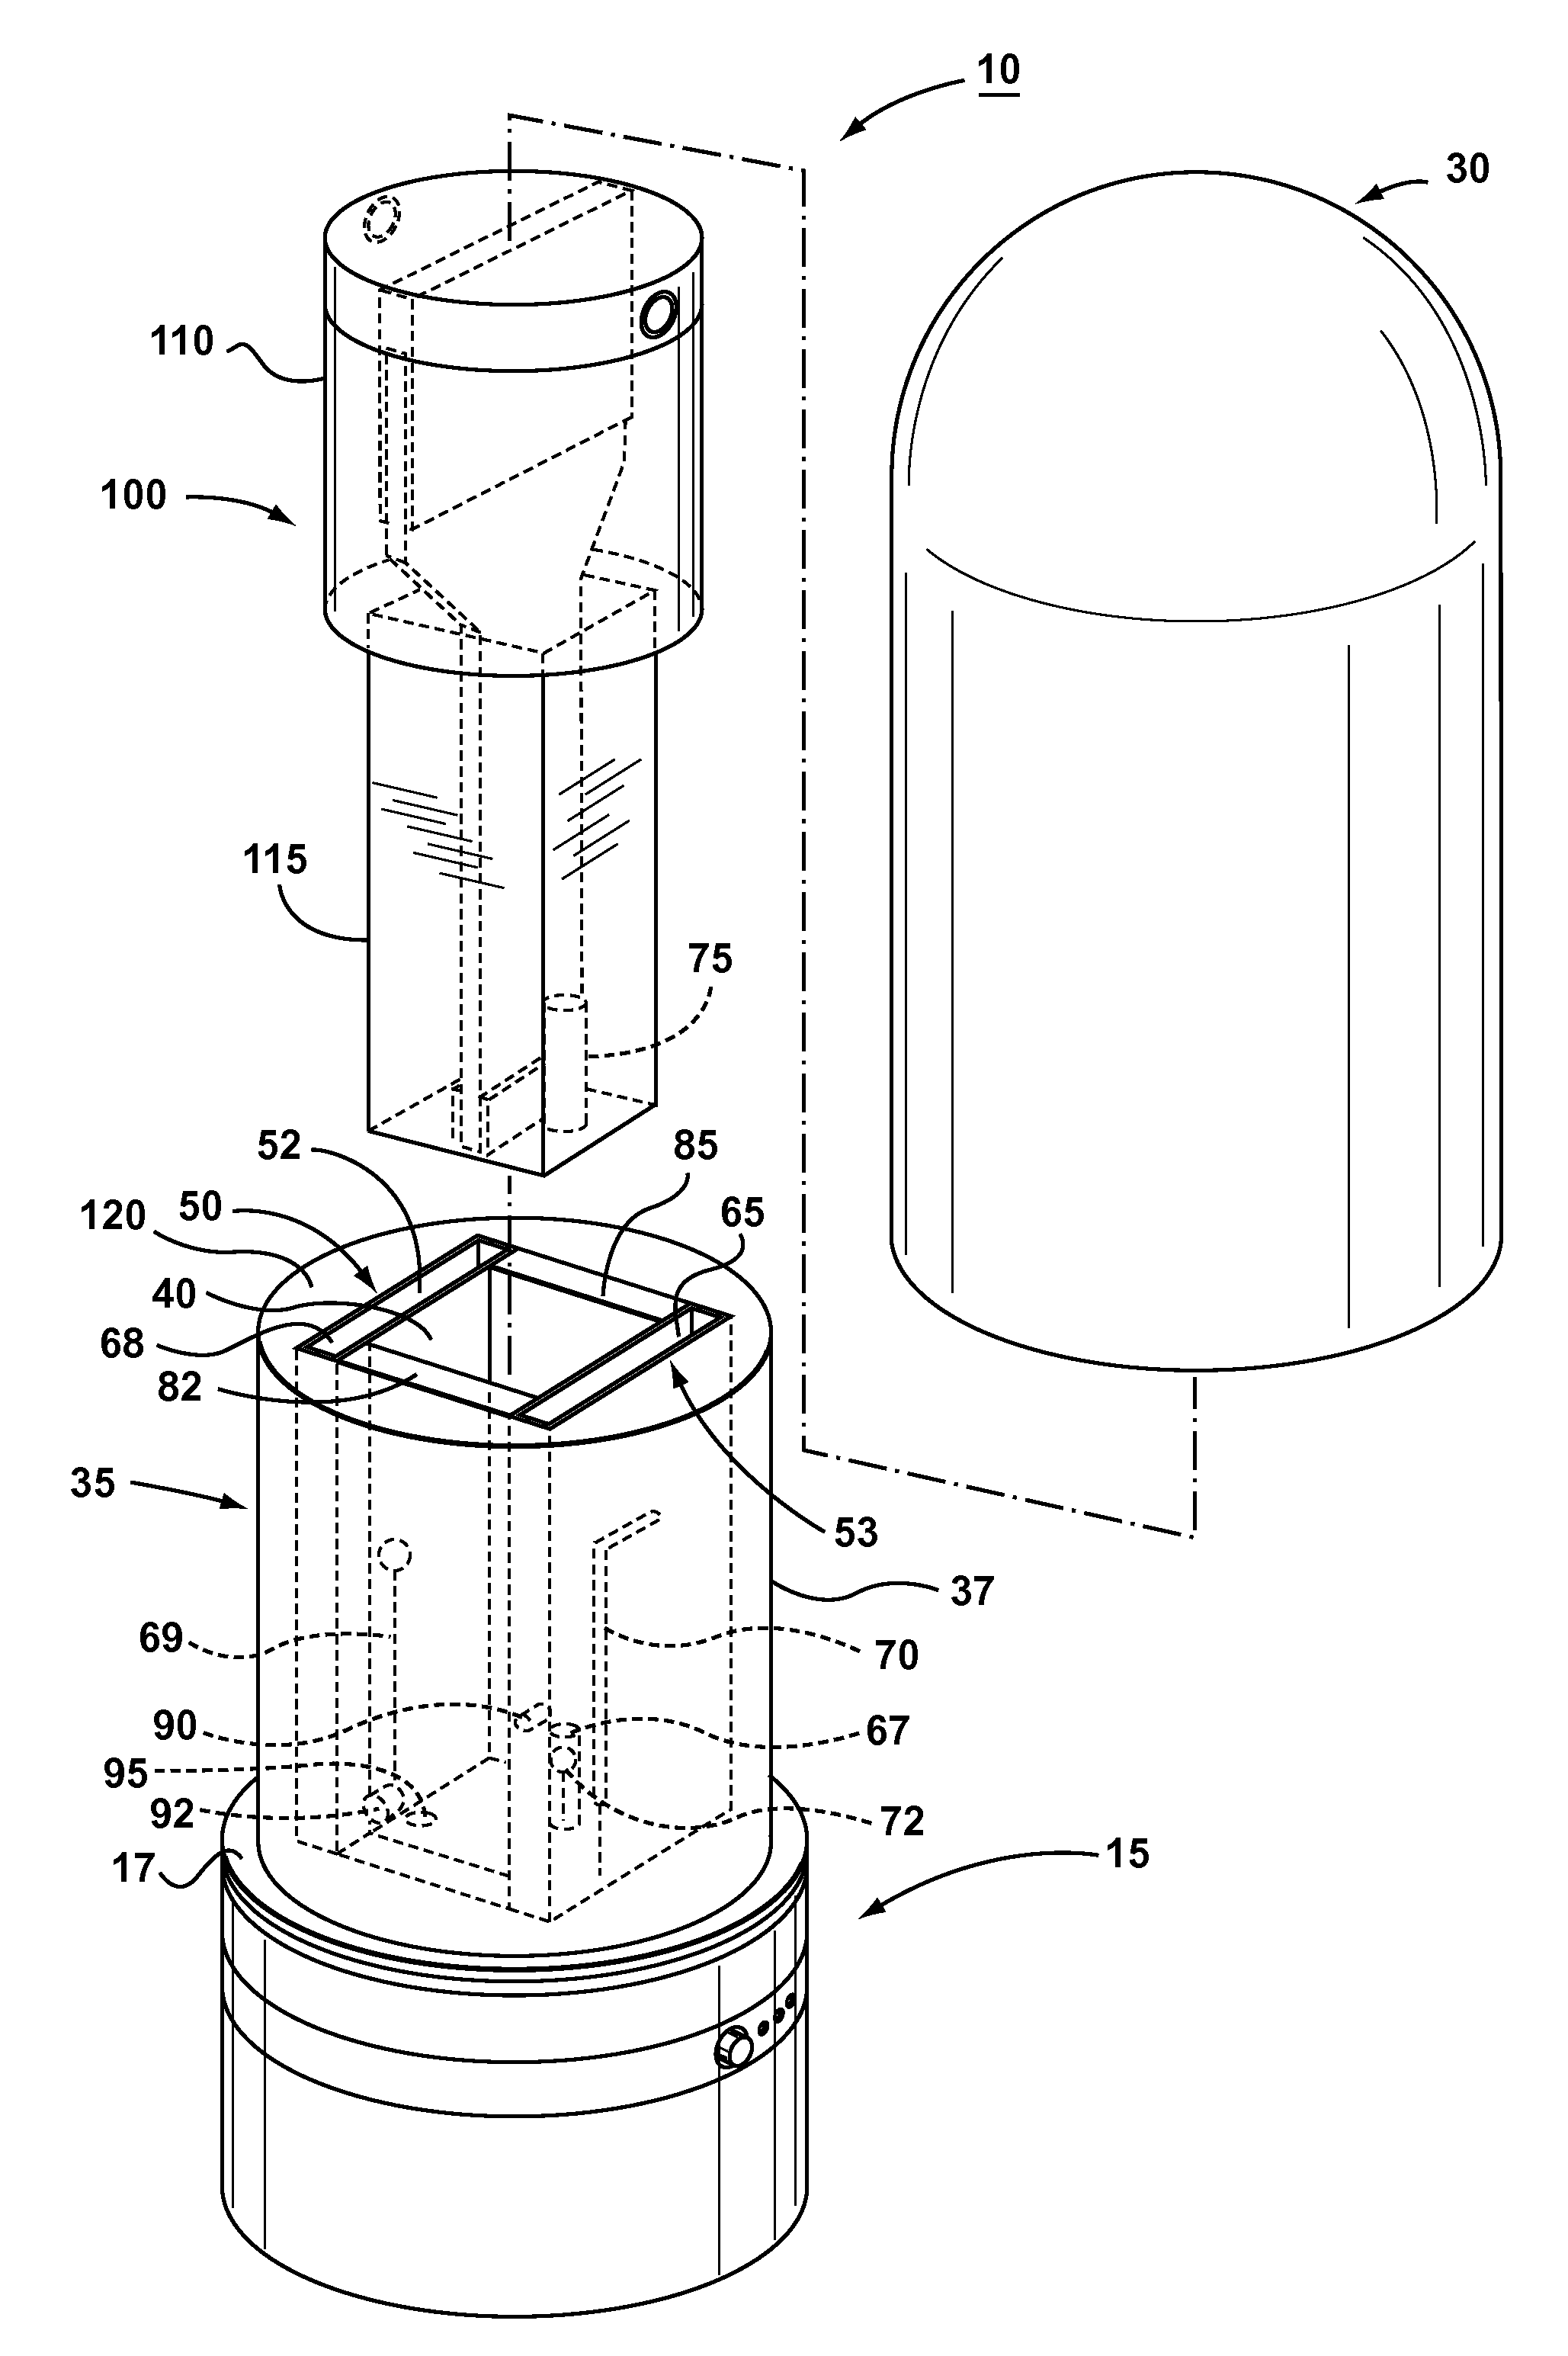 Apparatus and methods for automated diffusion filtration, culturing and photometric detection and enumeration of microbiological parameters in fluid samples